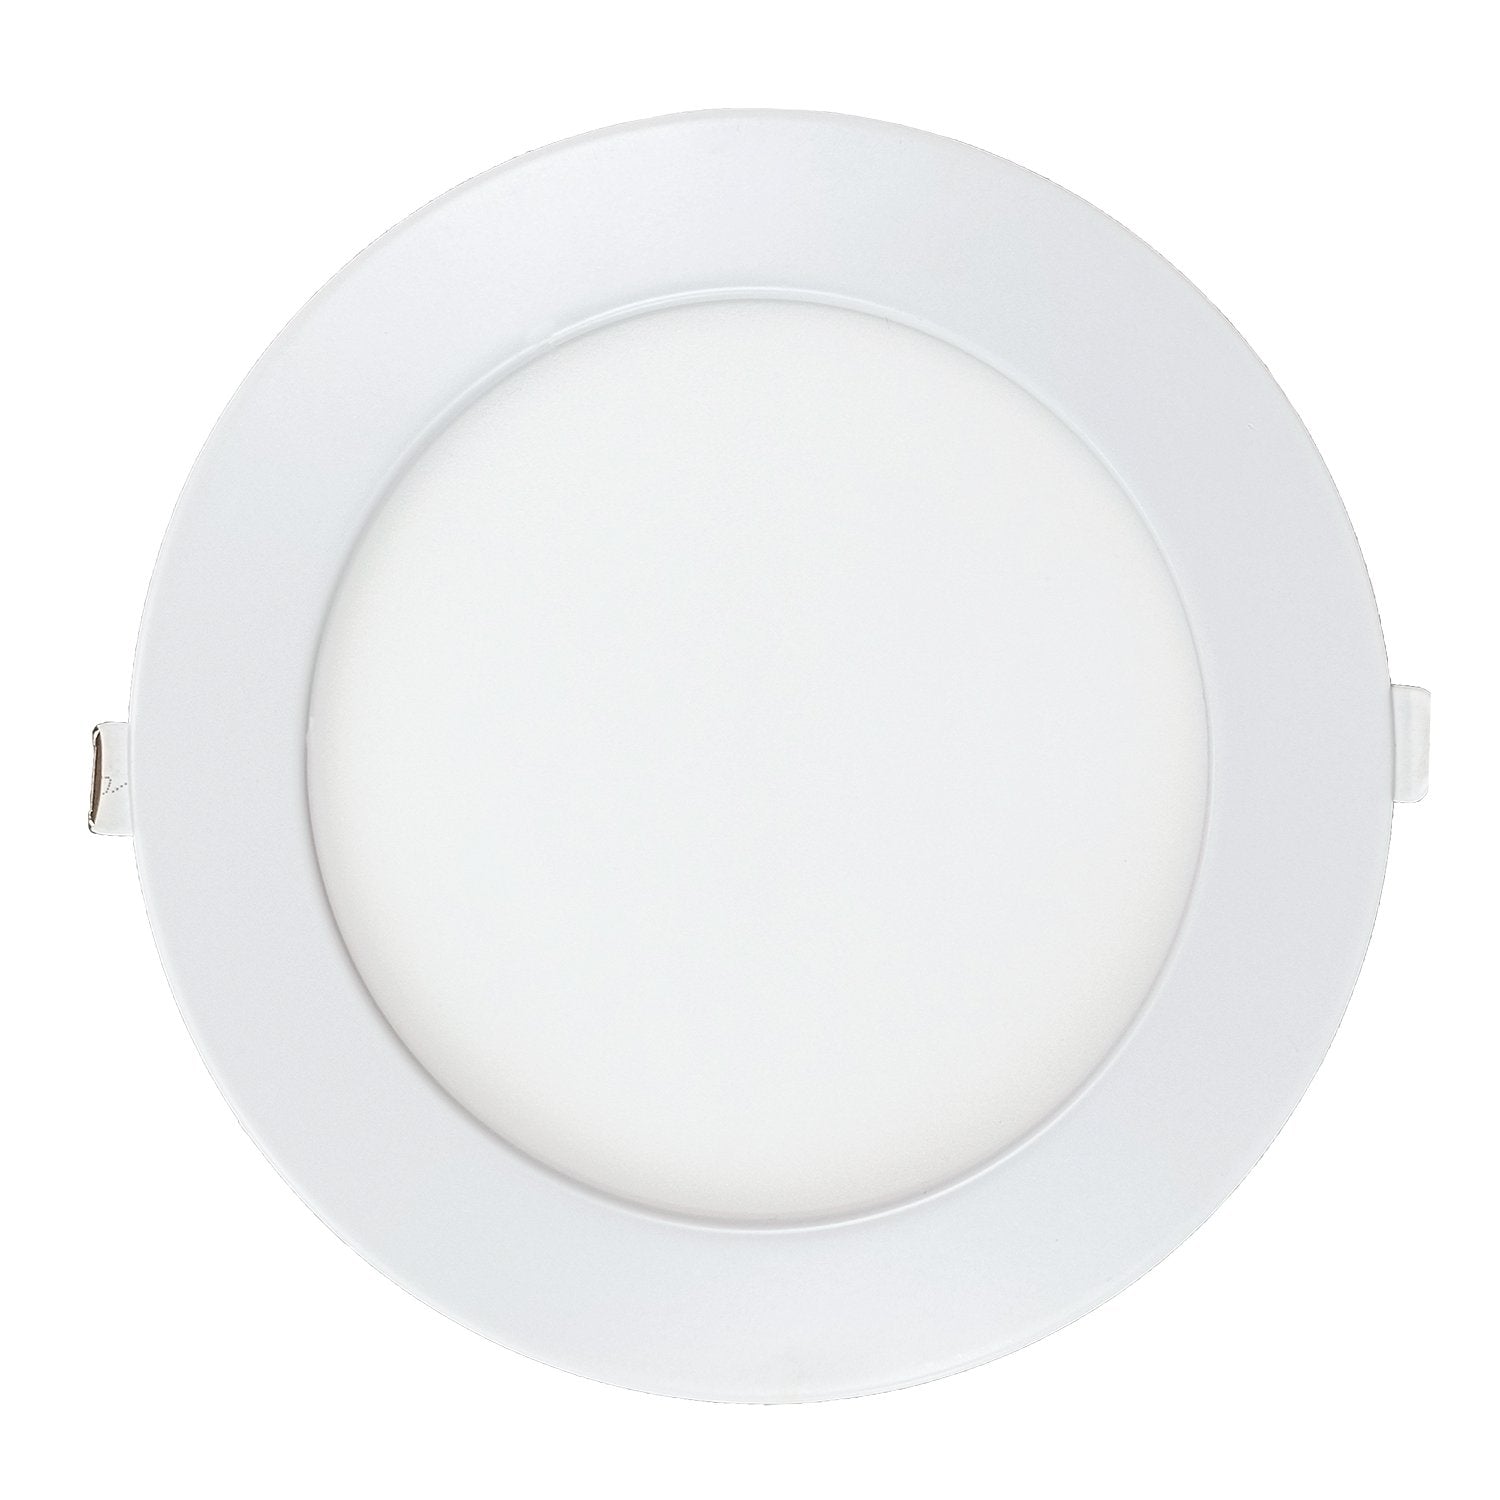 GDL-G96924Goodlite G-96924 6" 18W LED Round Recessed Slim Spotlight Selectable CCT Fire Rated